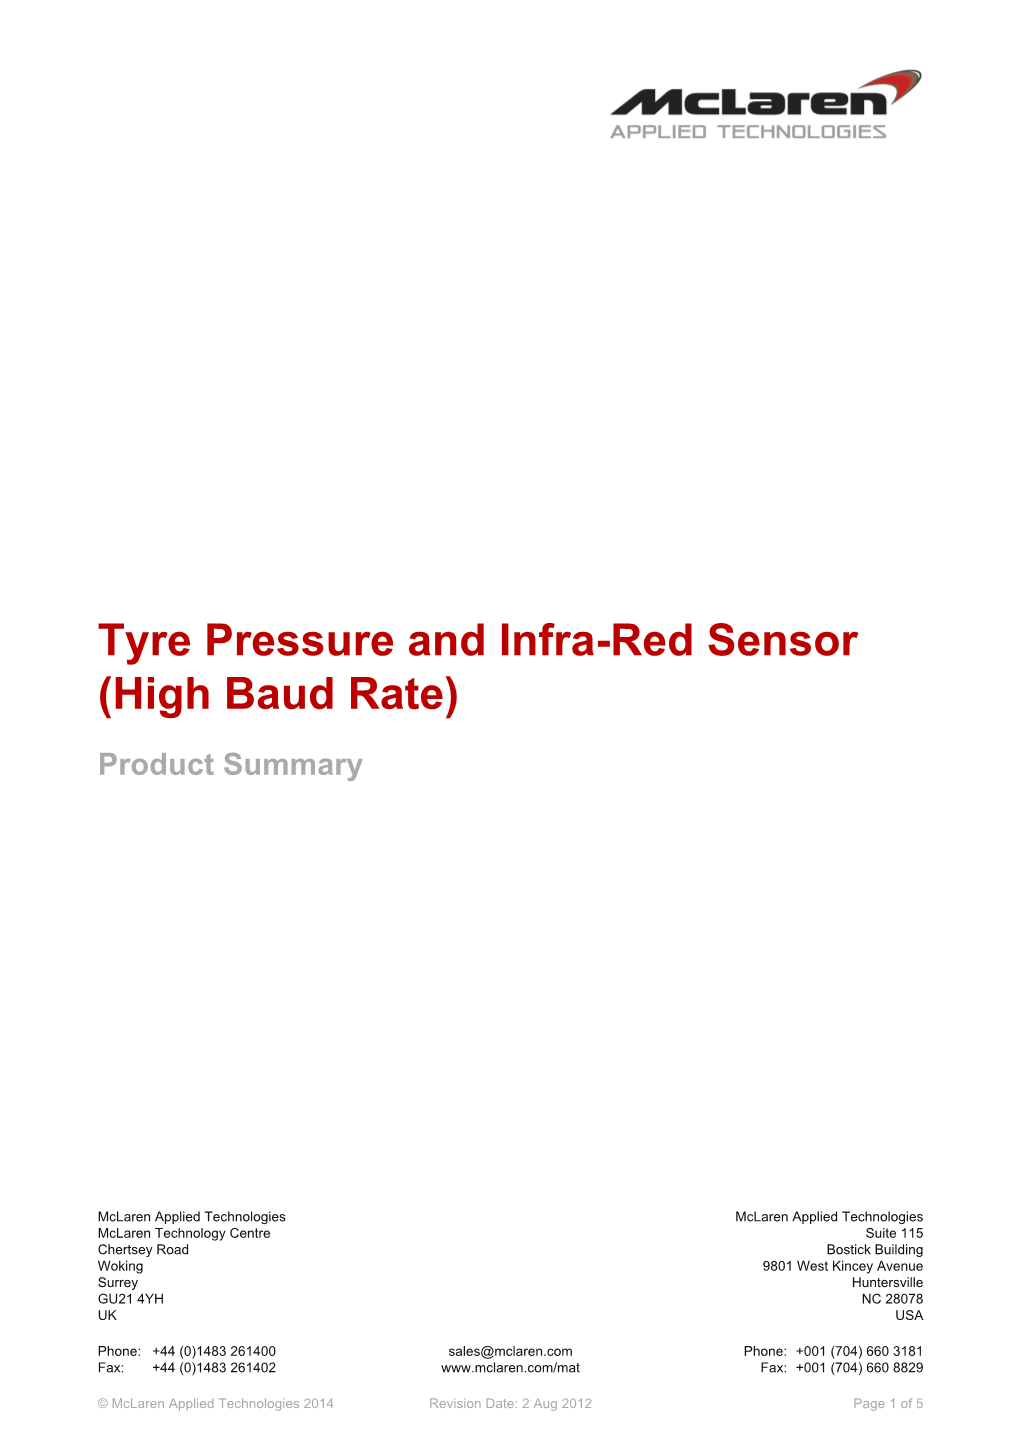 Tyre Pressure and Infra-Red Sensor (High Baud Rate)